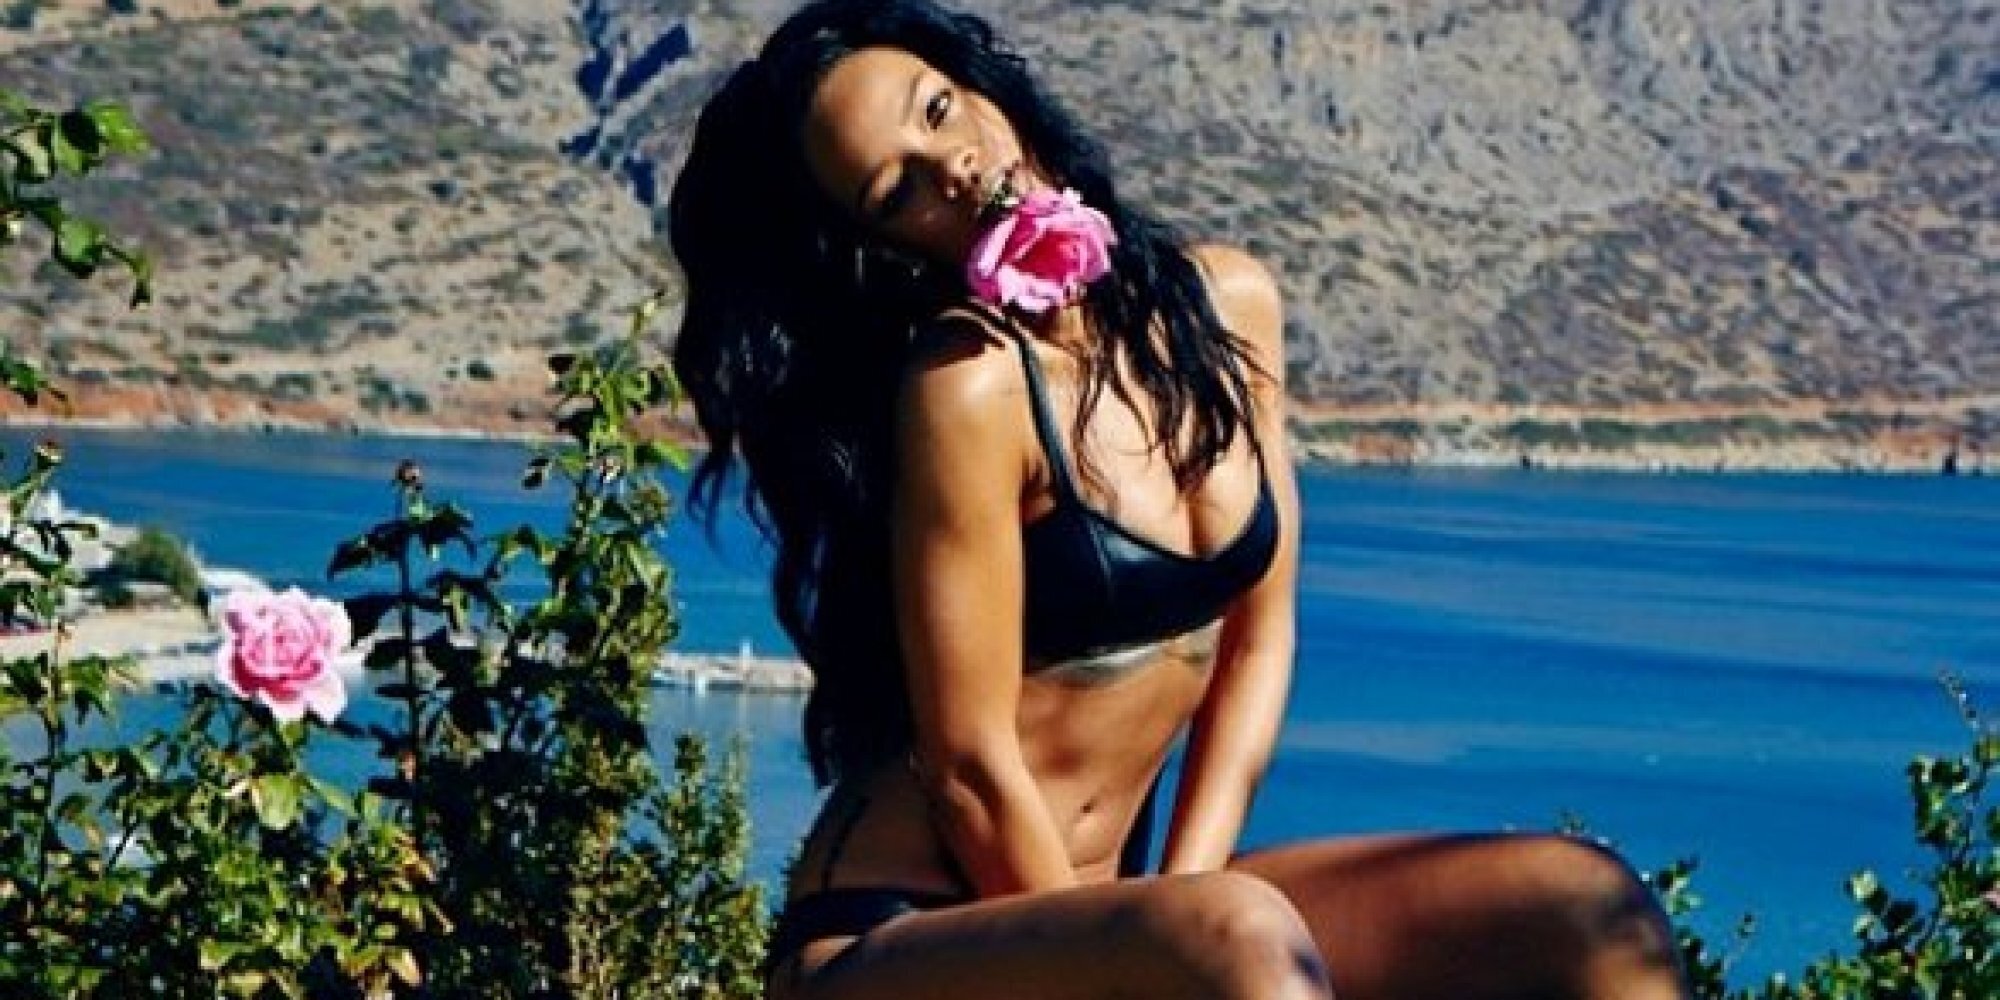 Rihanna Wears Leather Bikini As She Poses For Sexy Poolside Snaps In Greece (PICTURES) HuffPost UK Entertainment